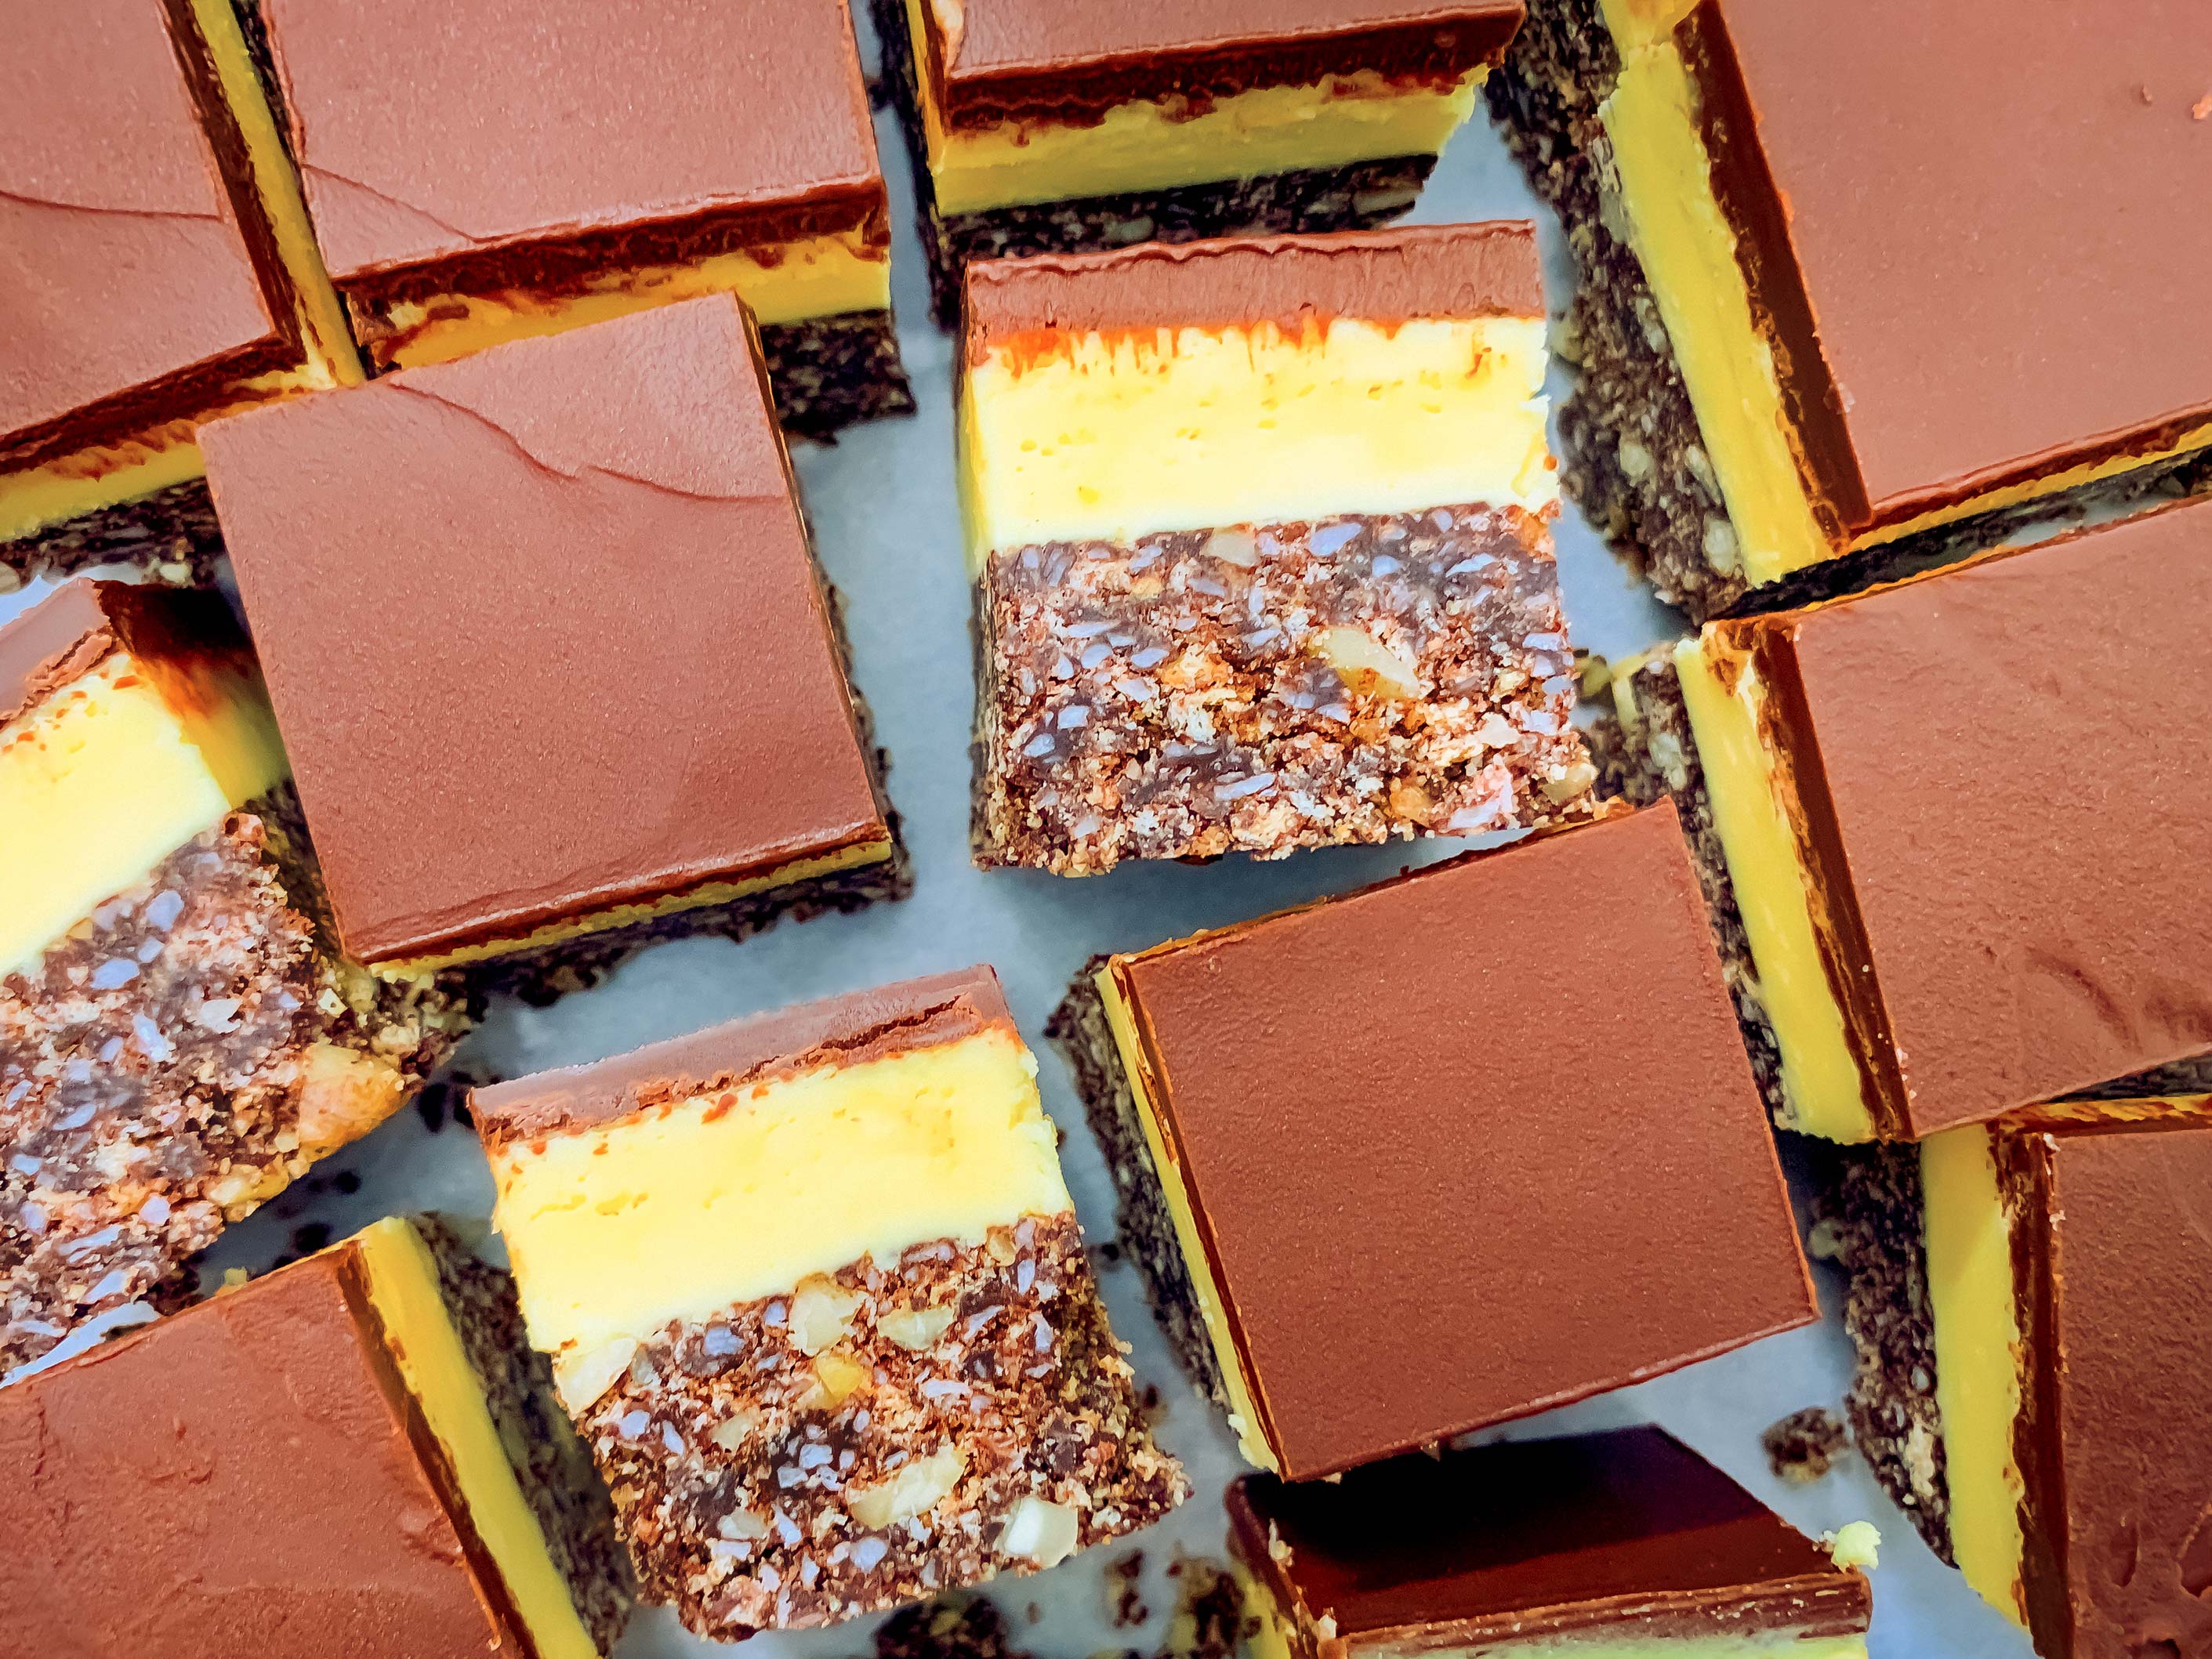 Nanaimo bars all cut up, some facing upwards, some on their sides so you can see the layers